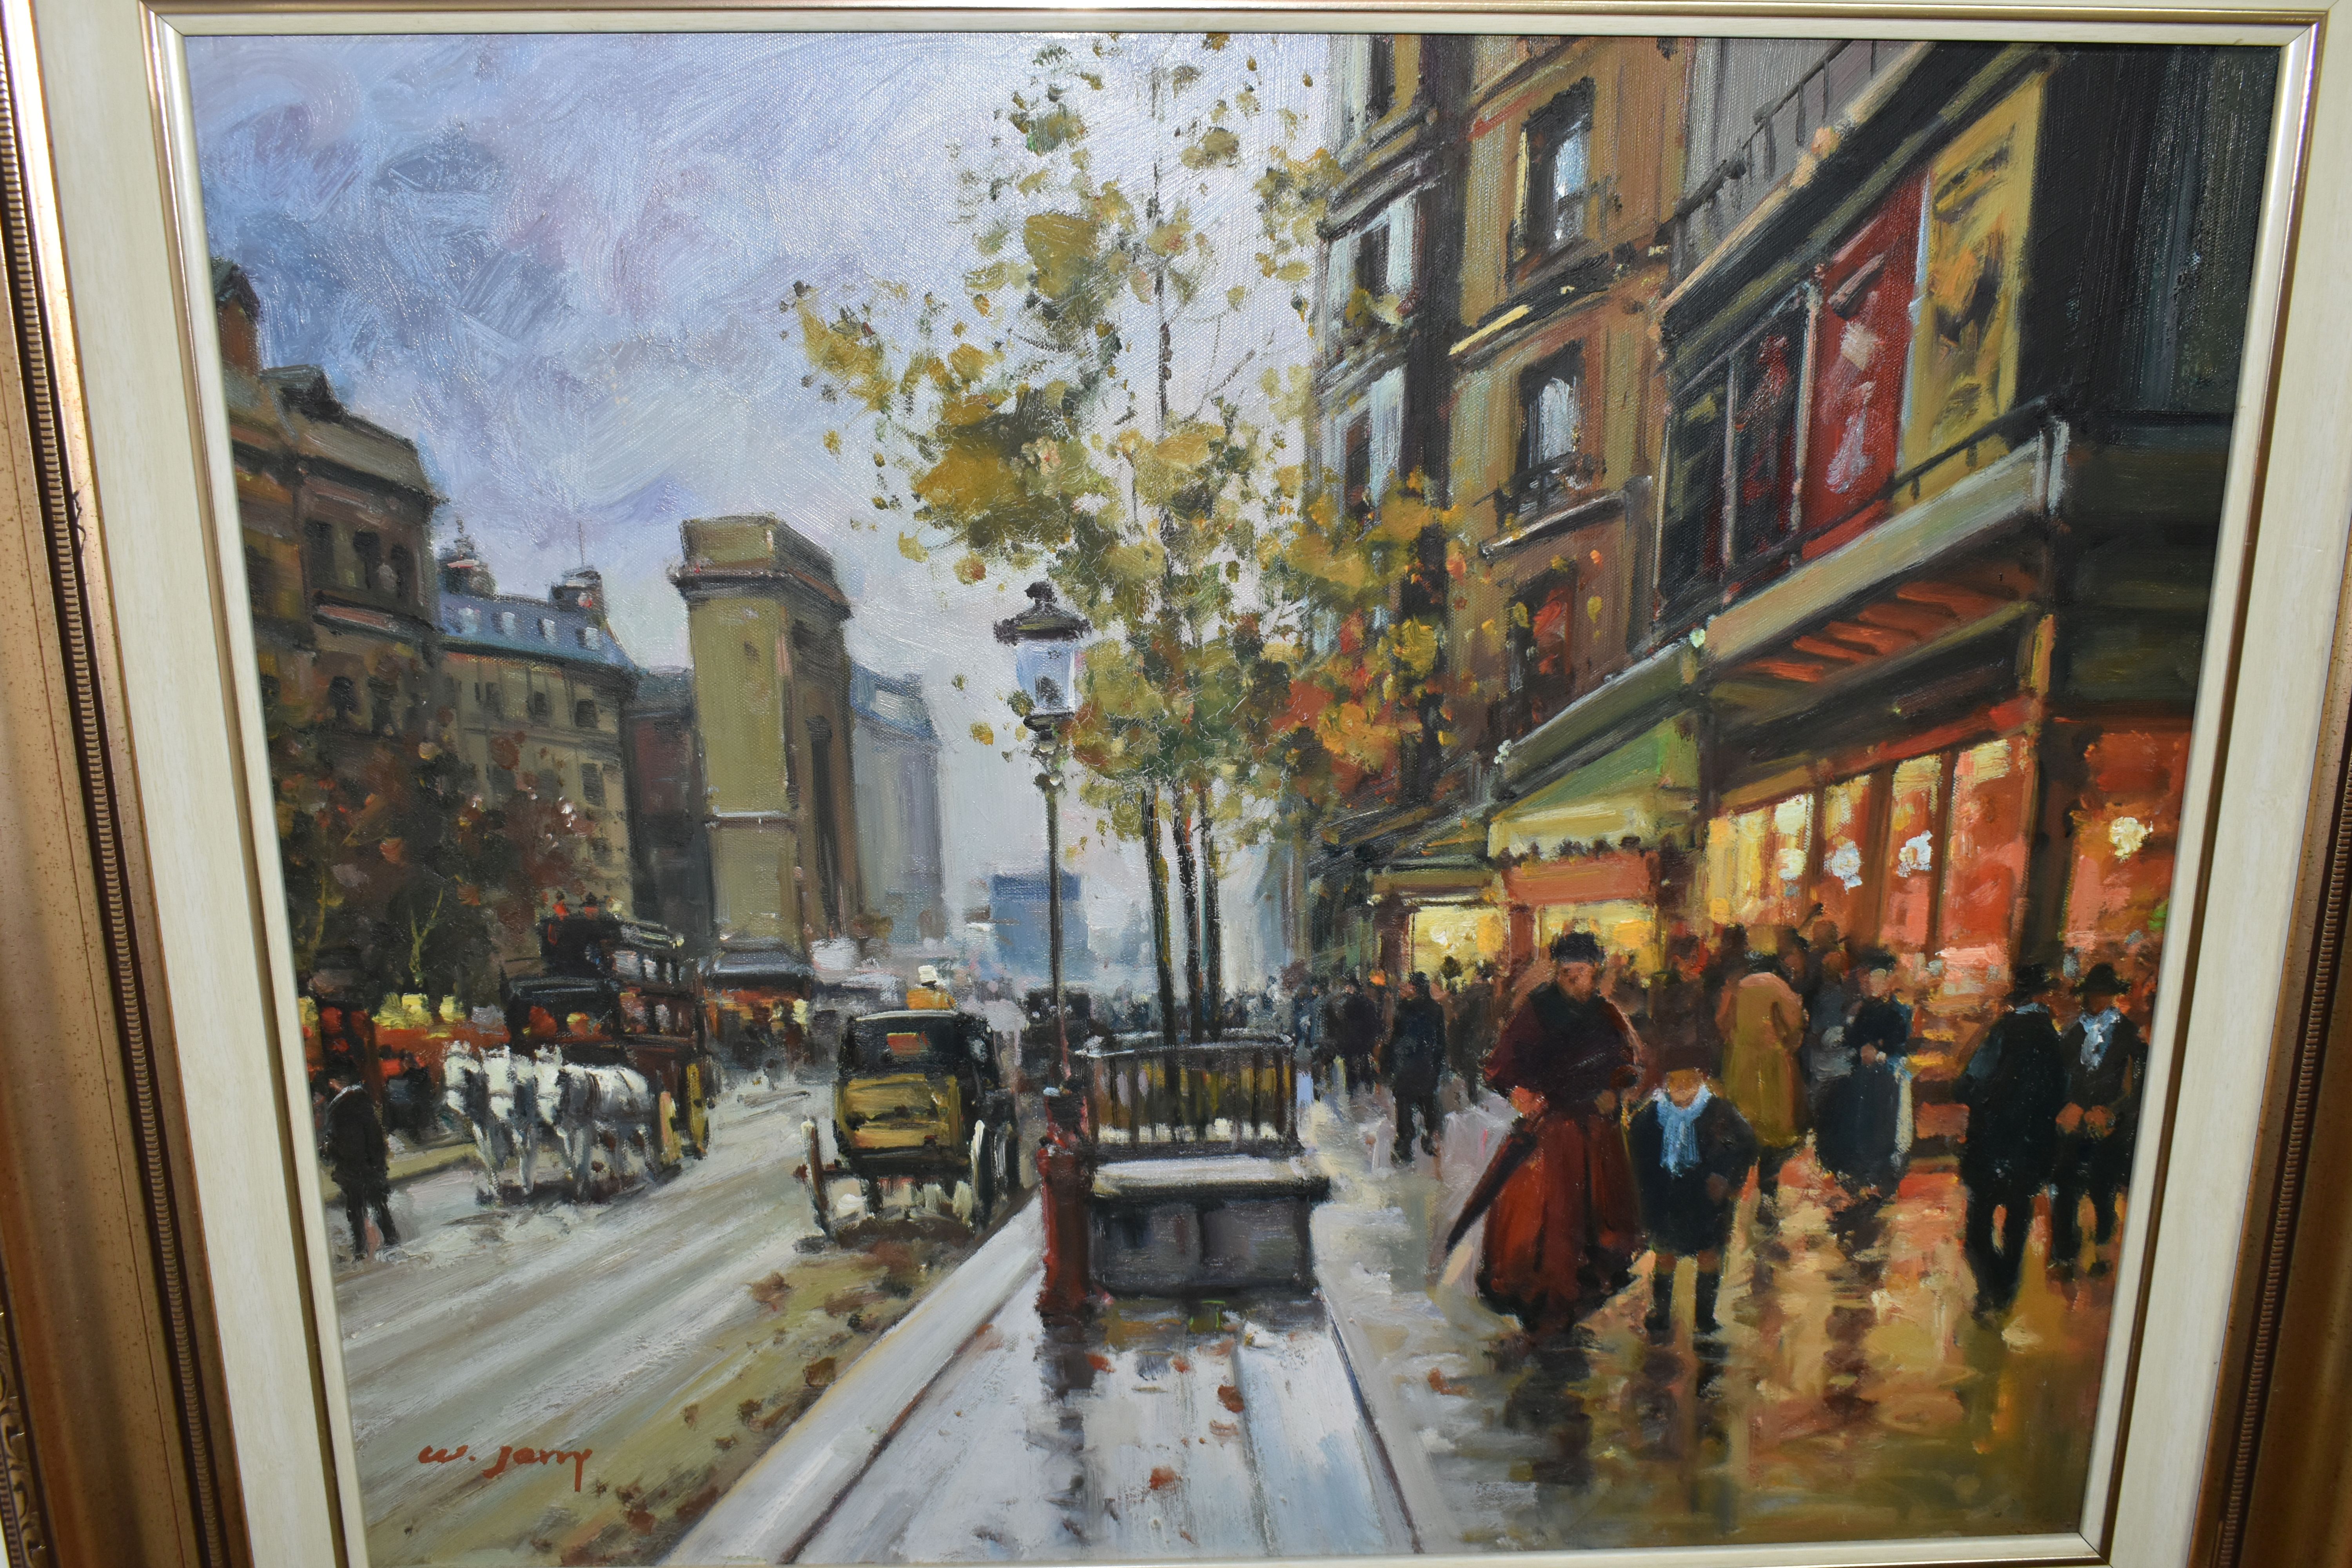 W. JERRY (CONTEMPORARY) 'PORTE SAINT-DENIS, EVENING', a French street scene after Edouard Cortes, - Image 2 of 4